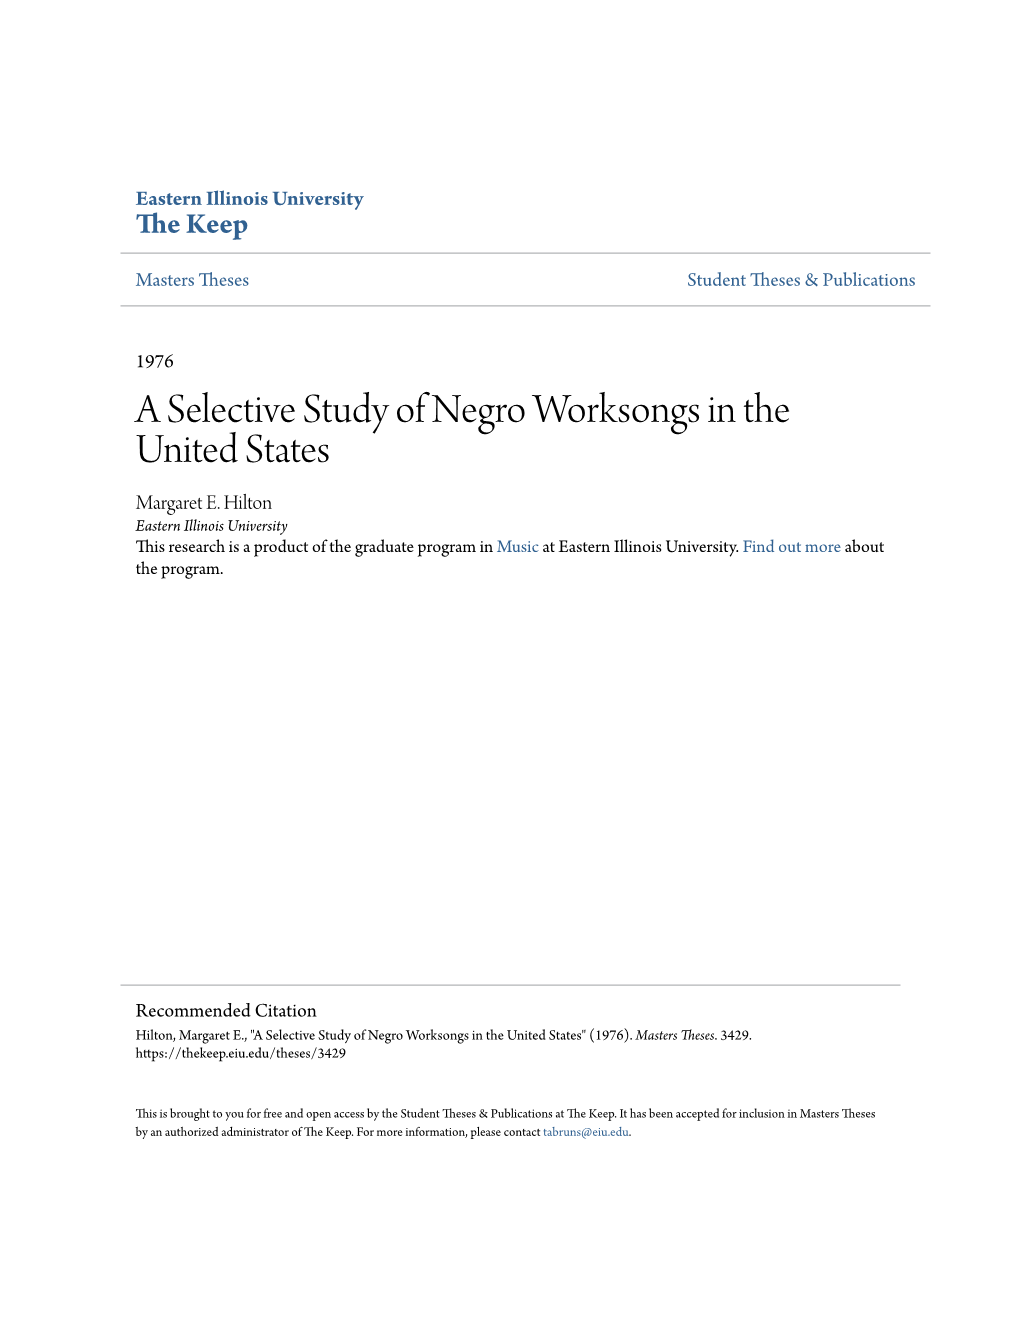 A Selective Study of Negro Worksongs in the United States Margaret E